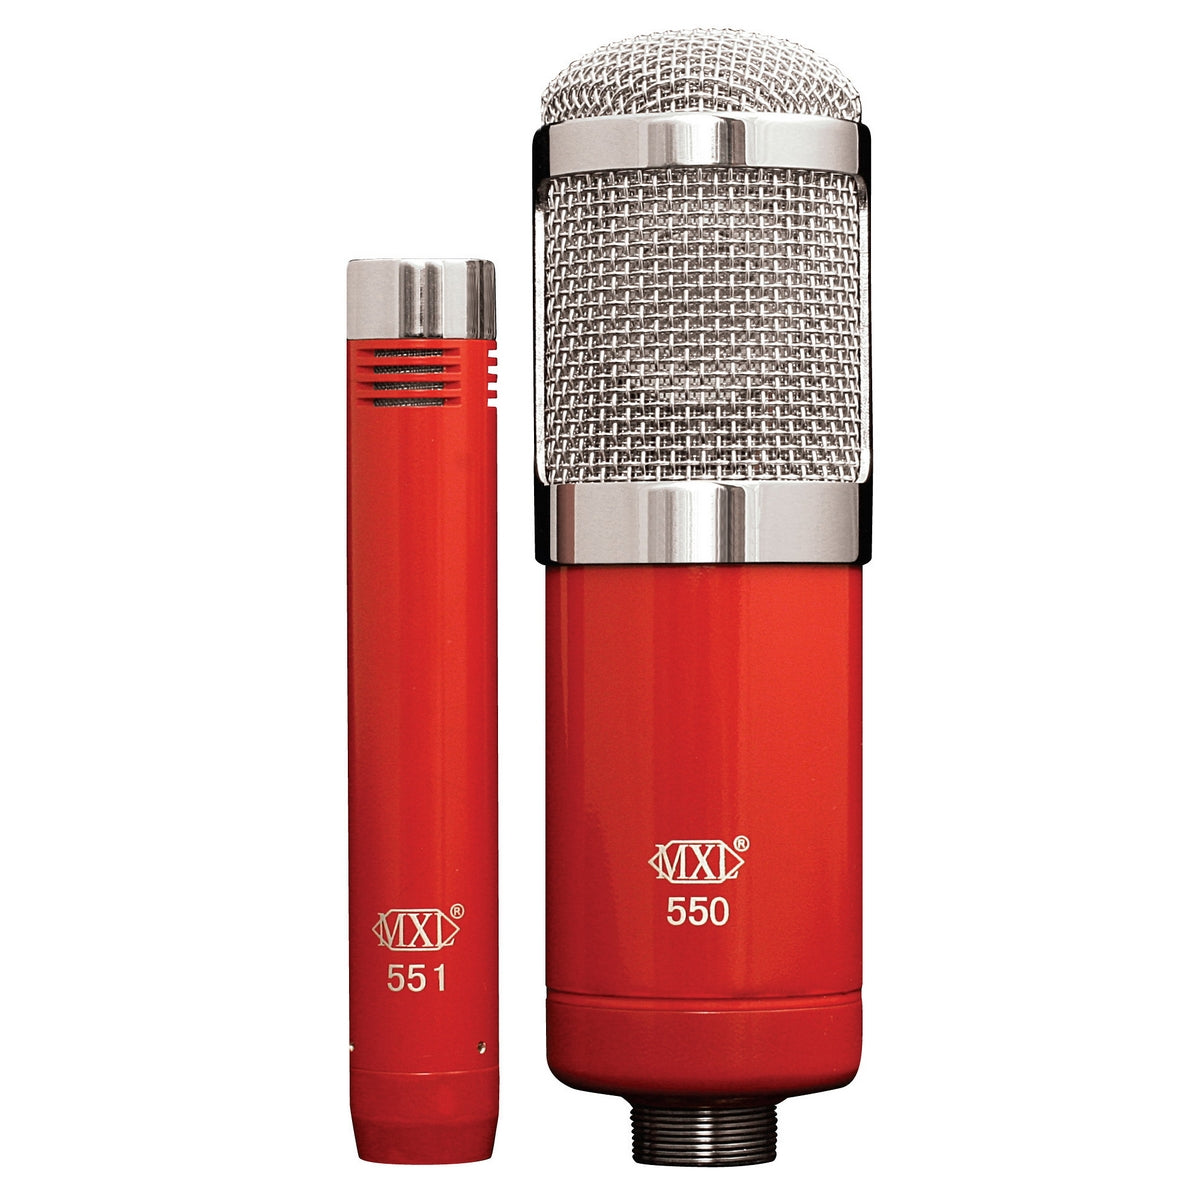 MXL 550/551R | Recording Microphone Kit includes 550 Vocal Condenser Microphone 551 Instrument Microphone